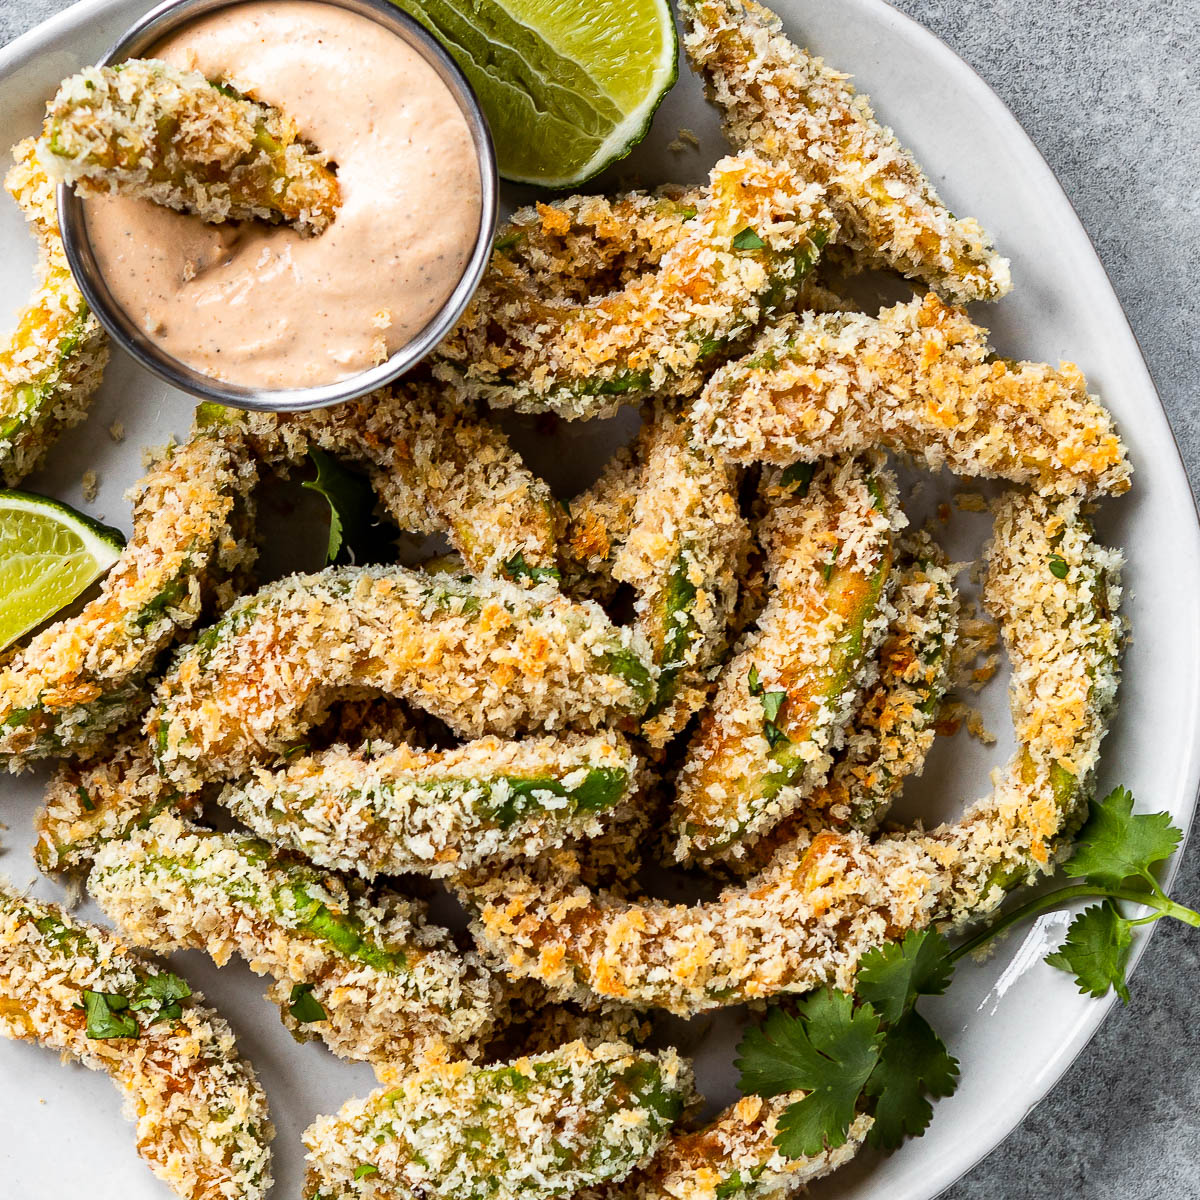 vegan avocado fries on a white plate with a container of chipotle ranch dipping sauce.